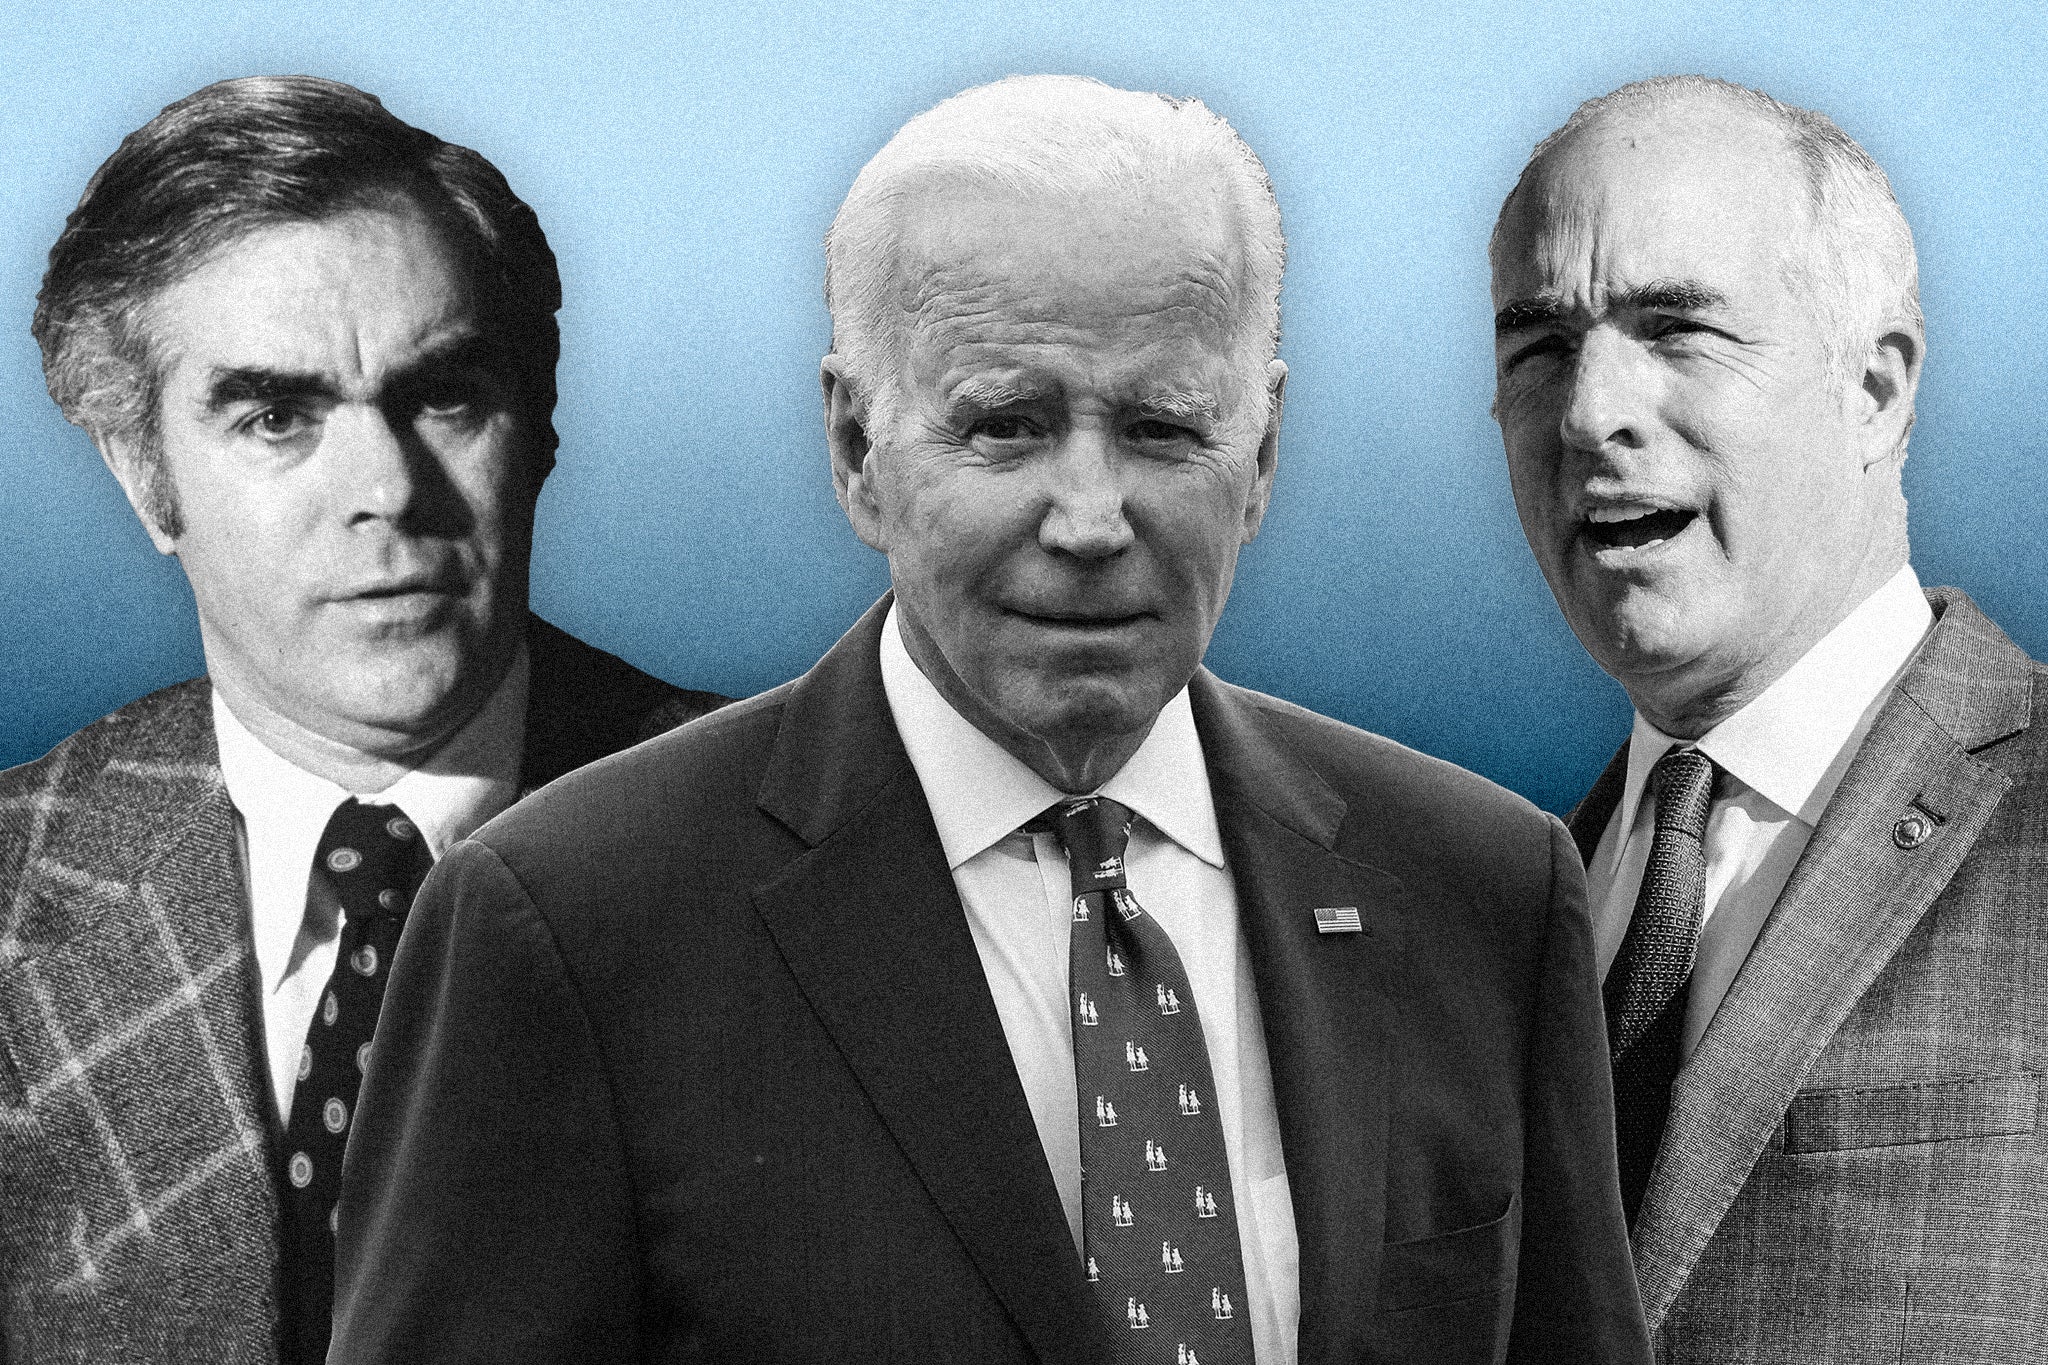 Senator Bob Casey (right) has been friends with Joe Biden for years, while his father, Bob Casey Sr (left) was one of the strongest opponents of abortion in the Democratic Party